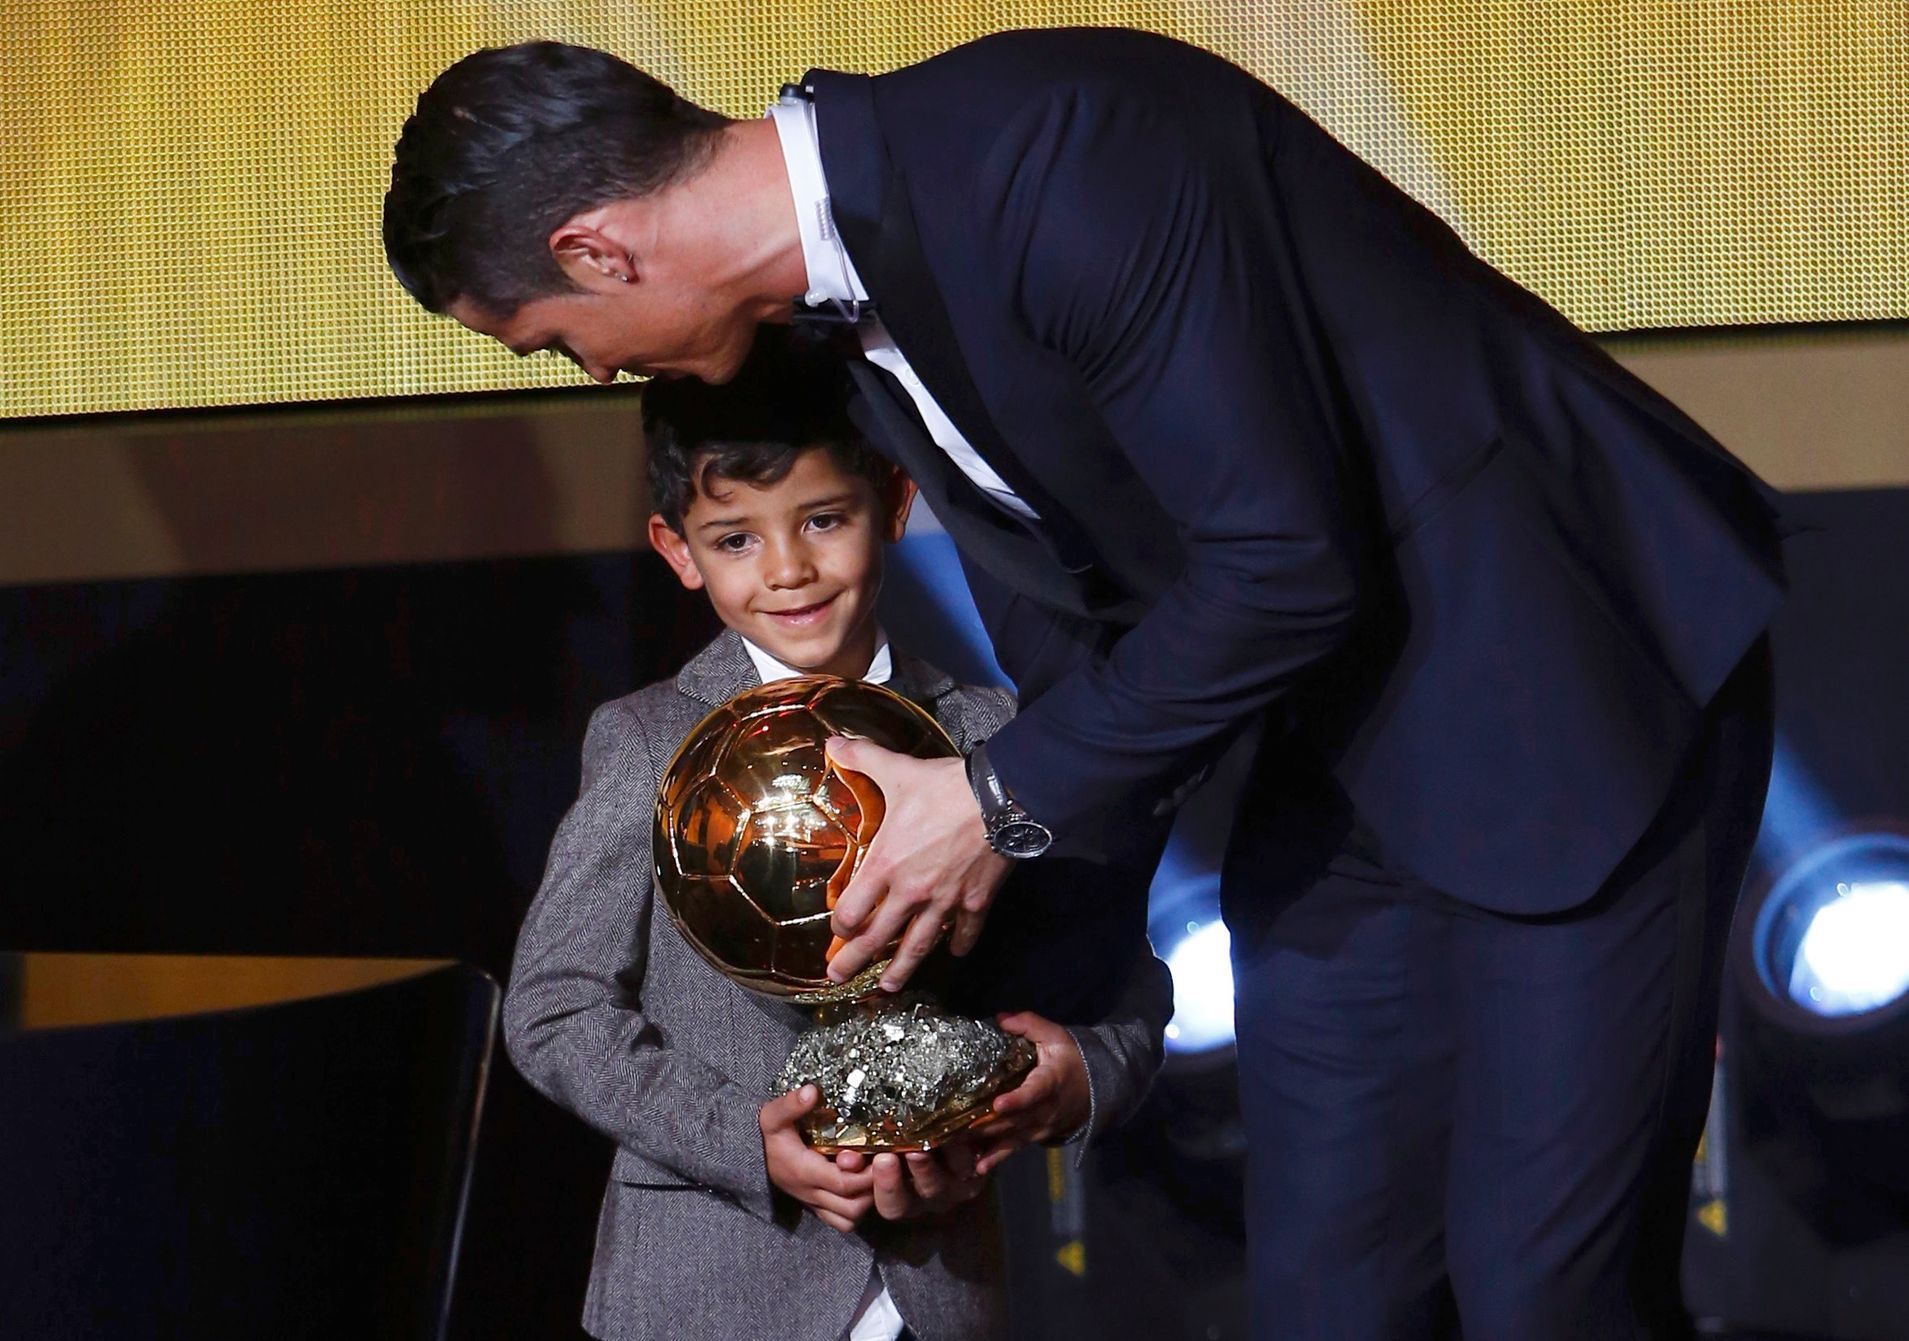 Real Madrid's Ronaldo stands with his son Cristiano Ronaldo Jr after winning FIFA Ballon d'Or 2014 in Zurich